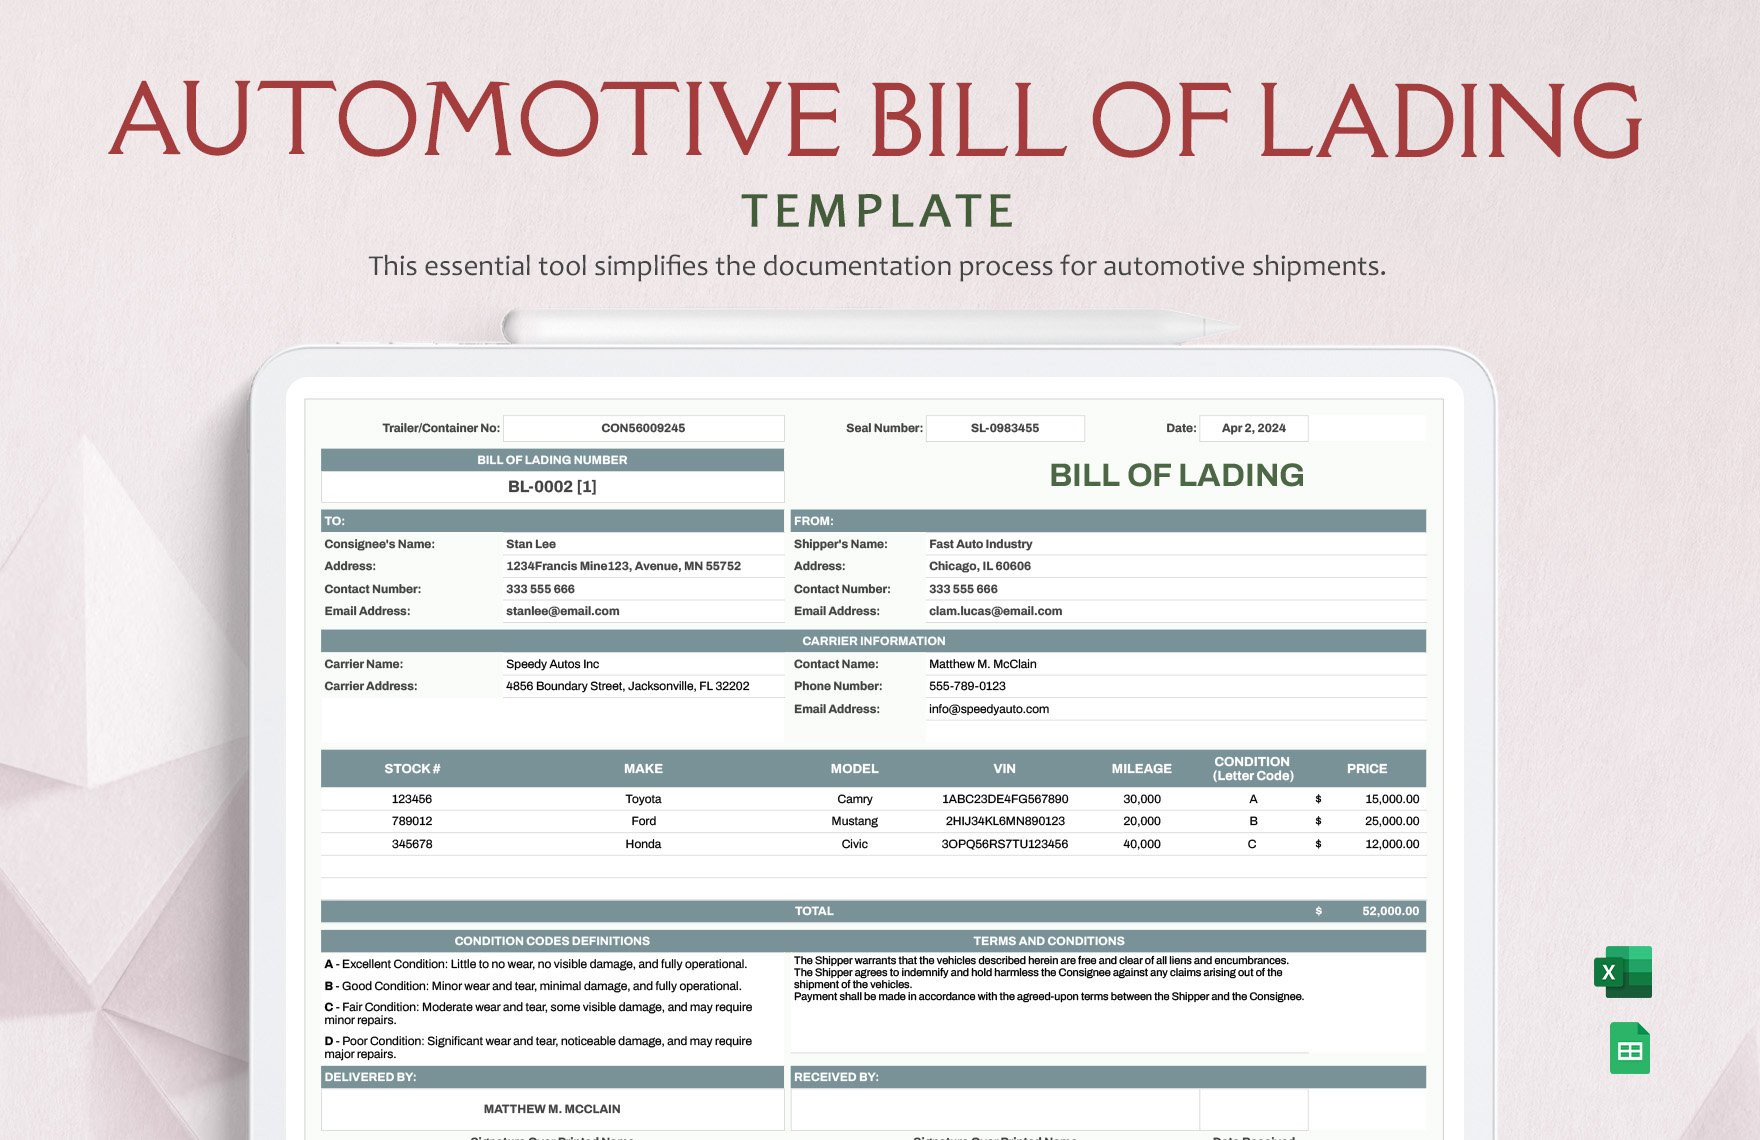 Automotive Bill of Lading Template